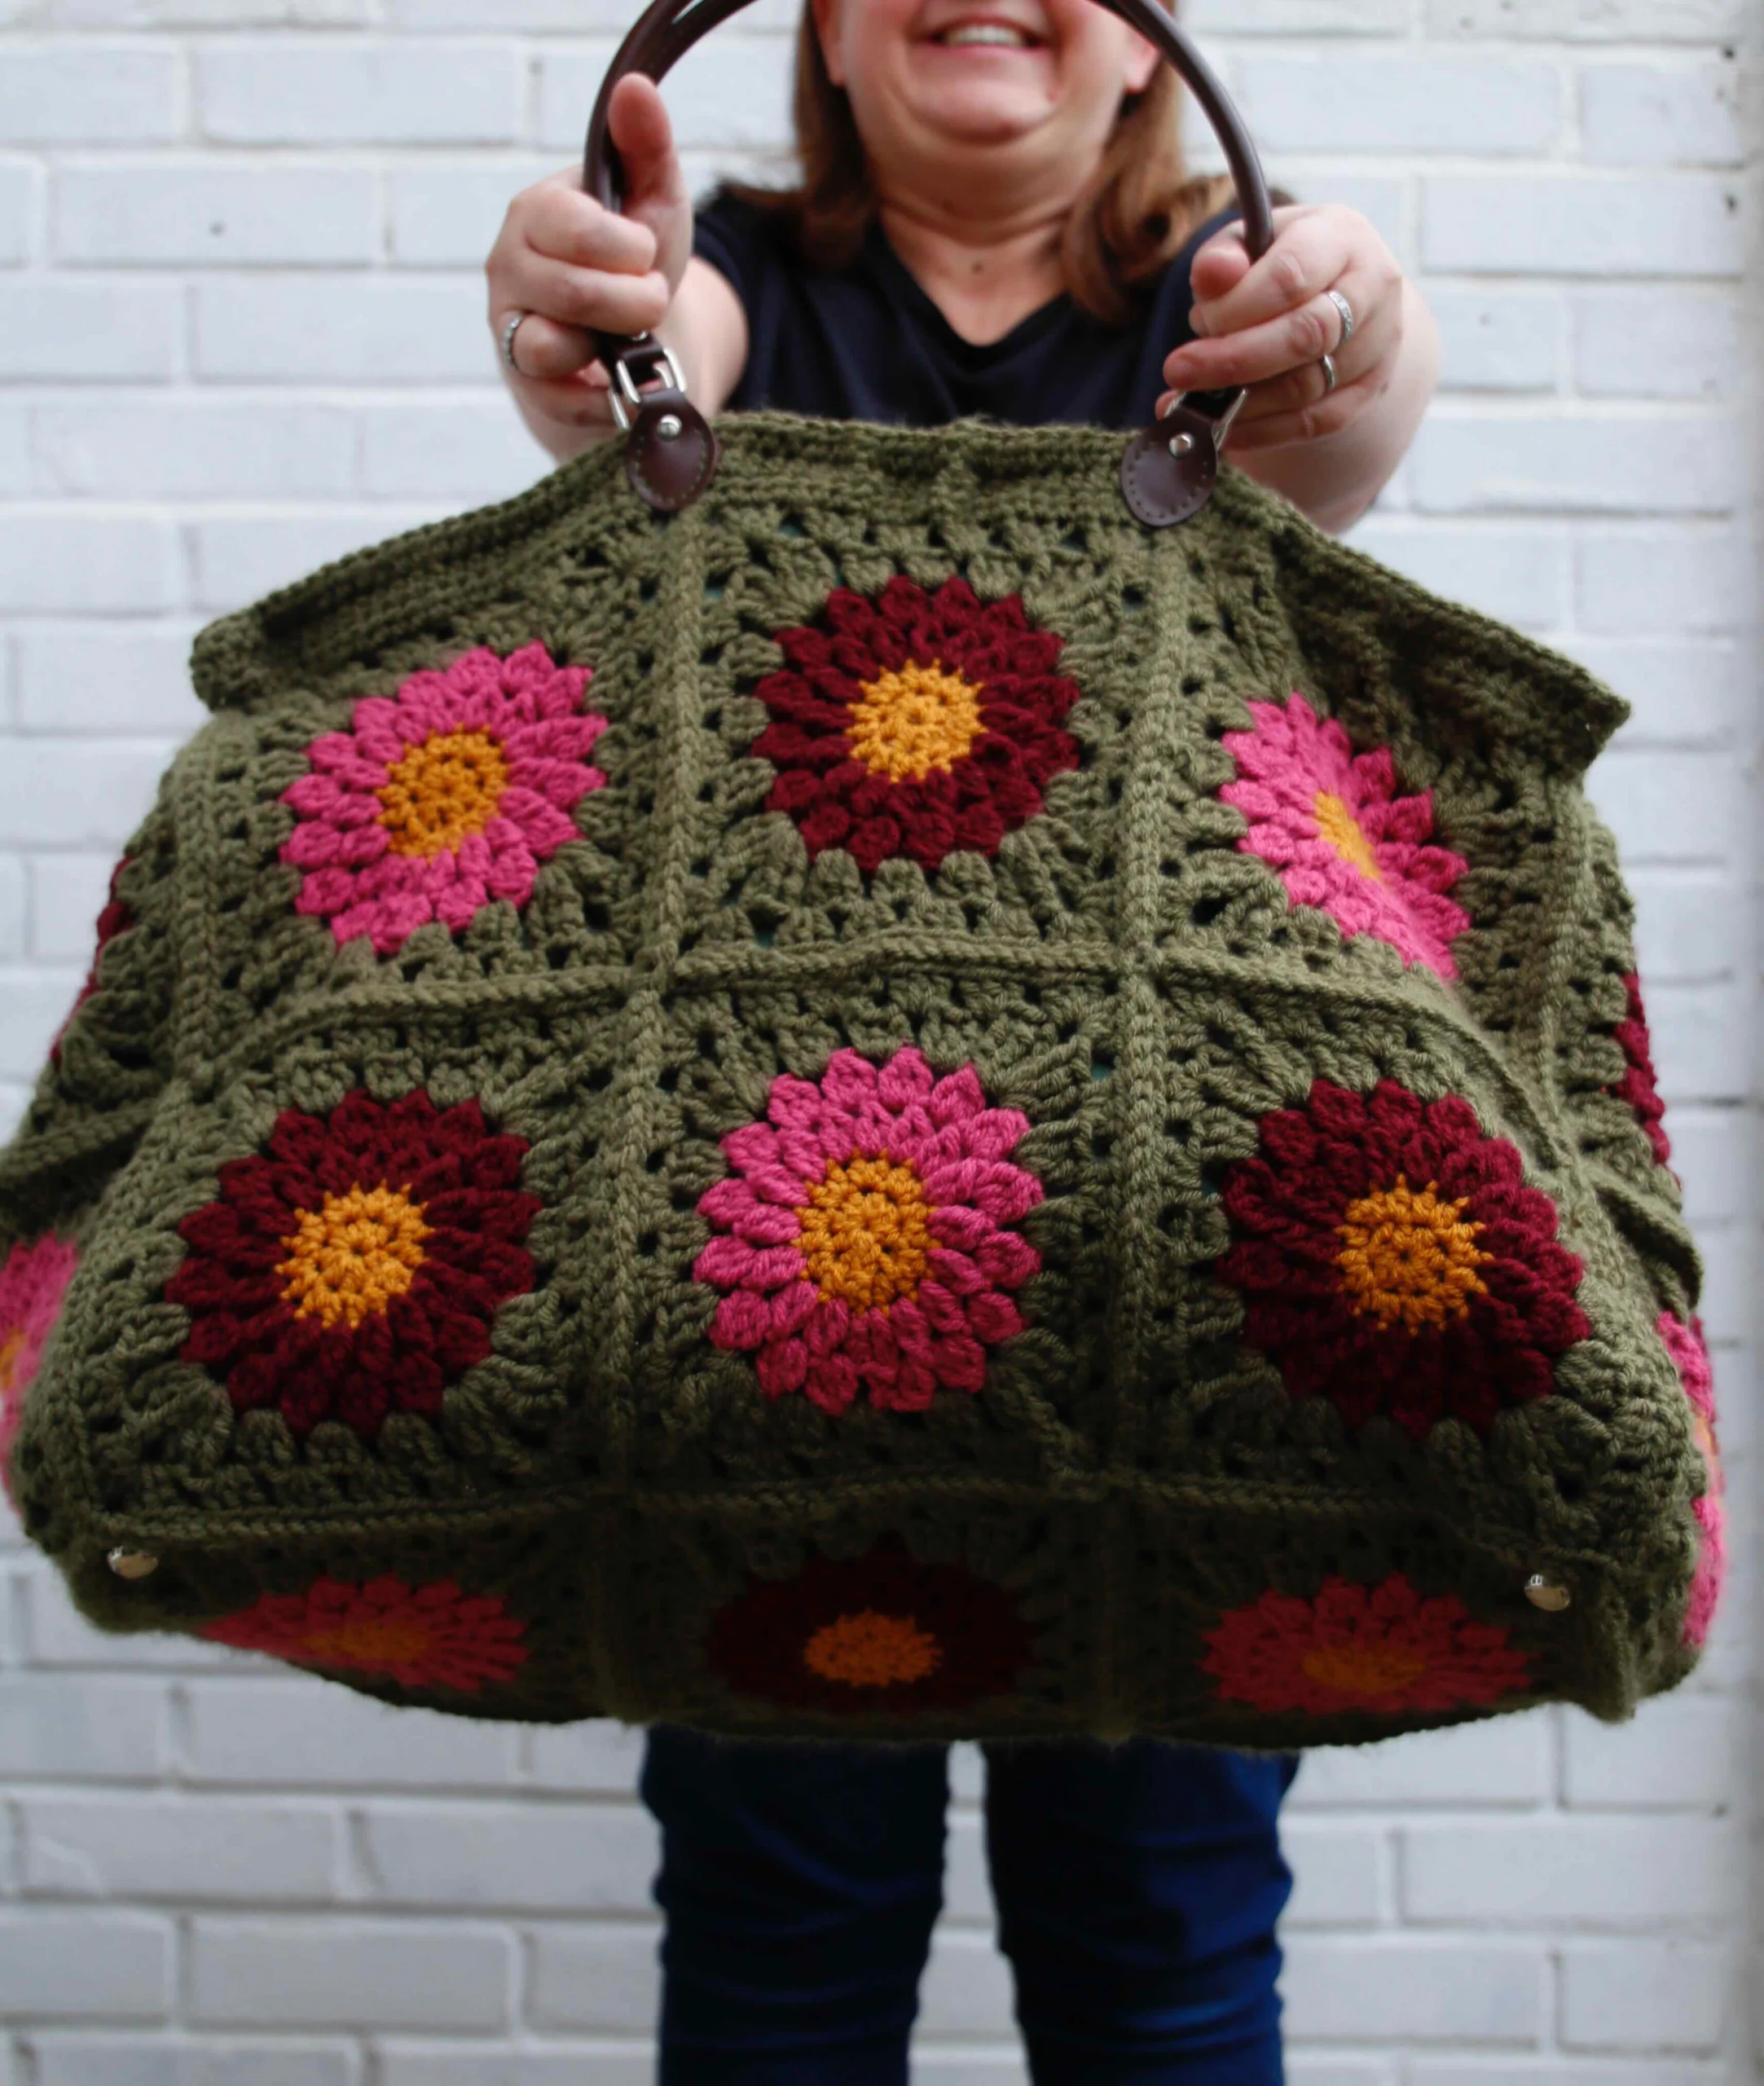 Large crochet bag - perfect for weekend trips away - free pattern